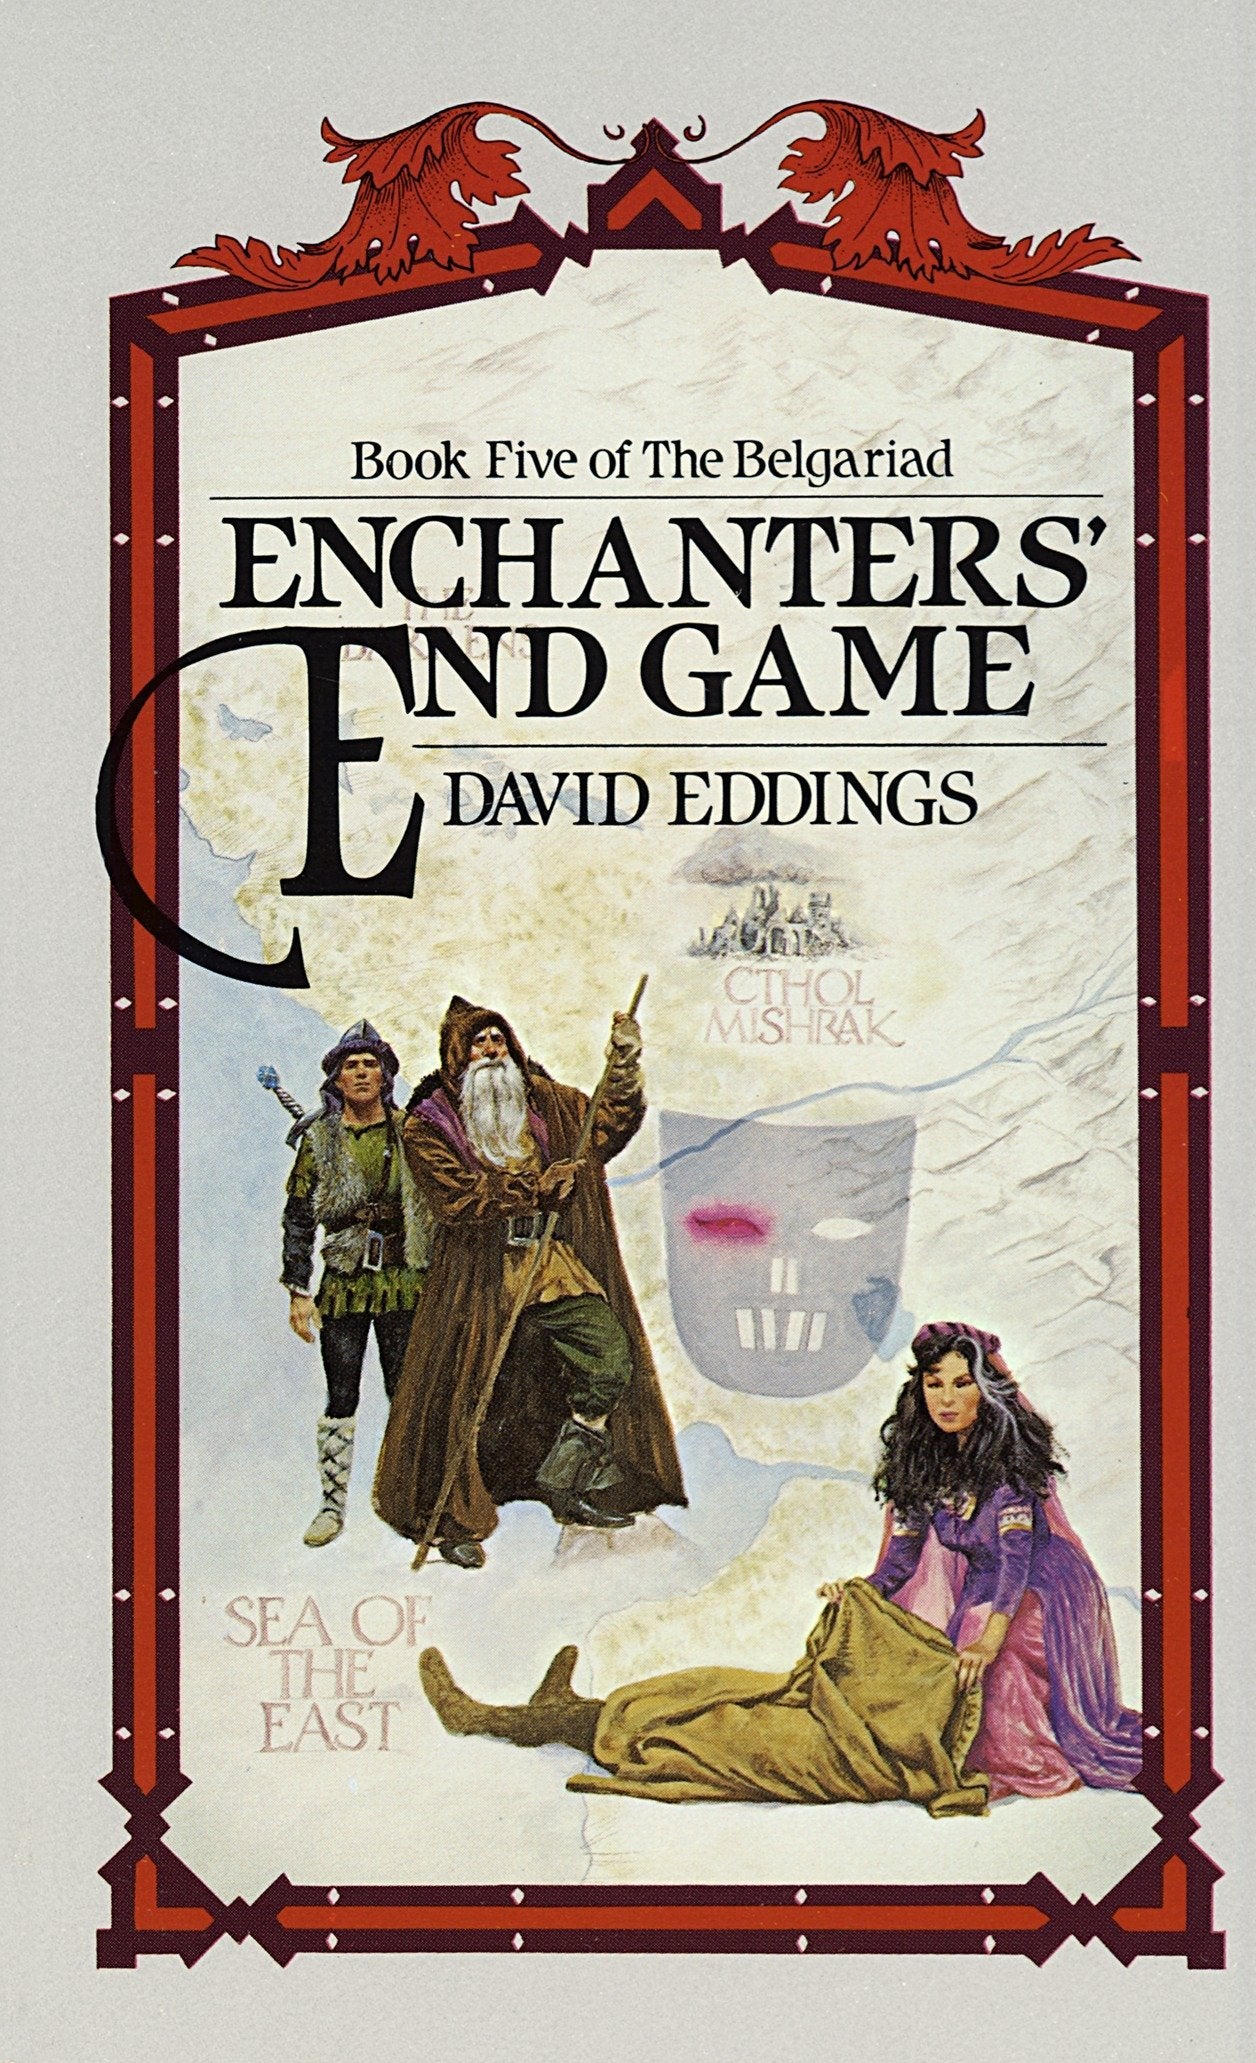 Enchanters' End Game (The Belgariad, Book 5)